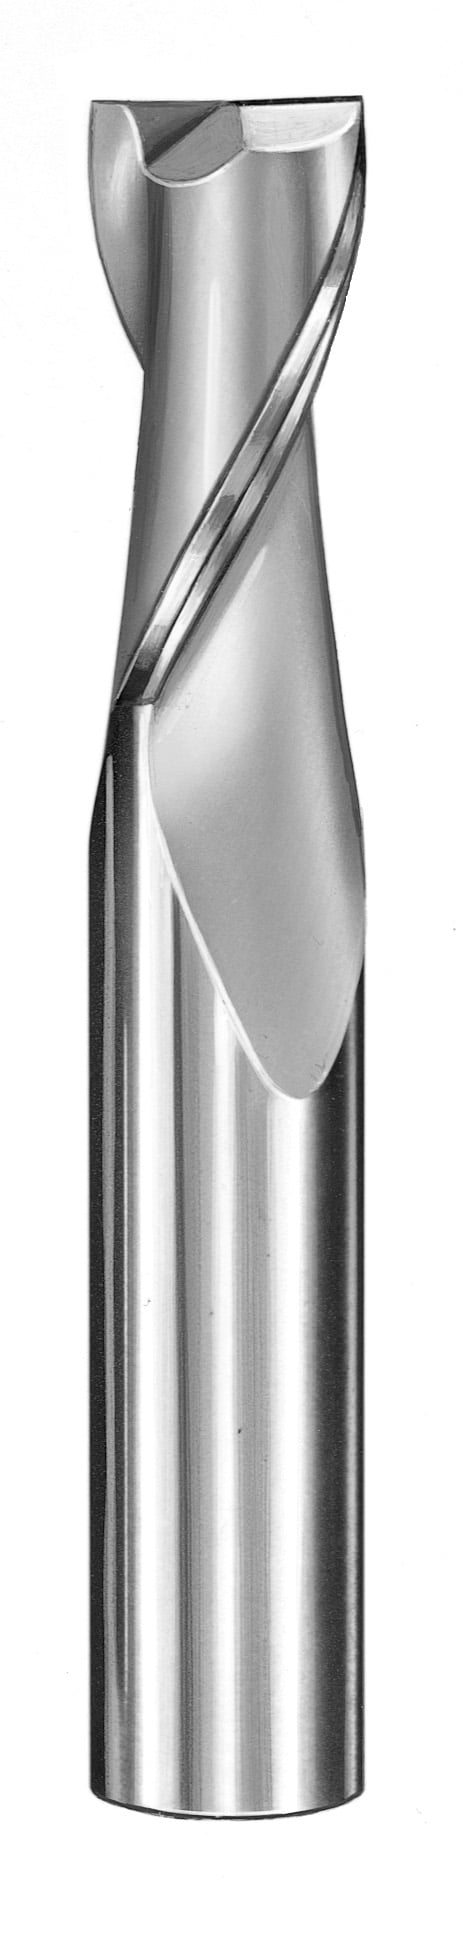 9/16" Dia, 2 Flute, Square End End Mill - 30365